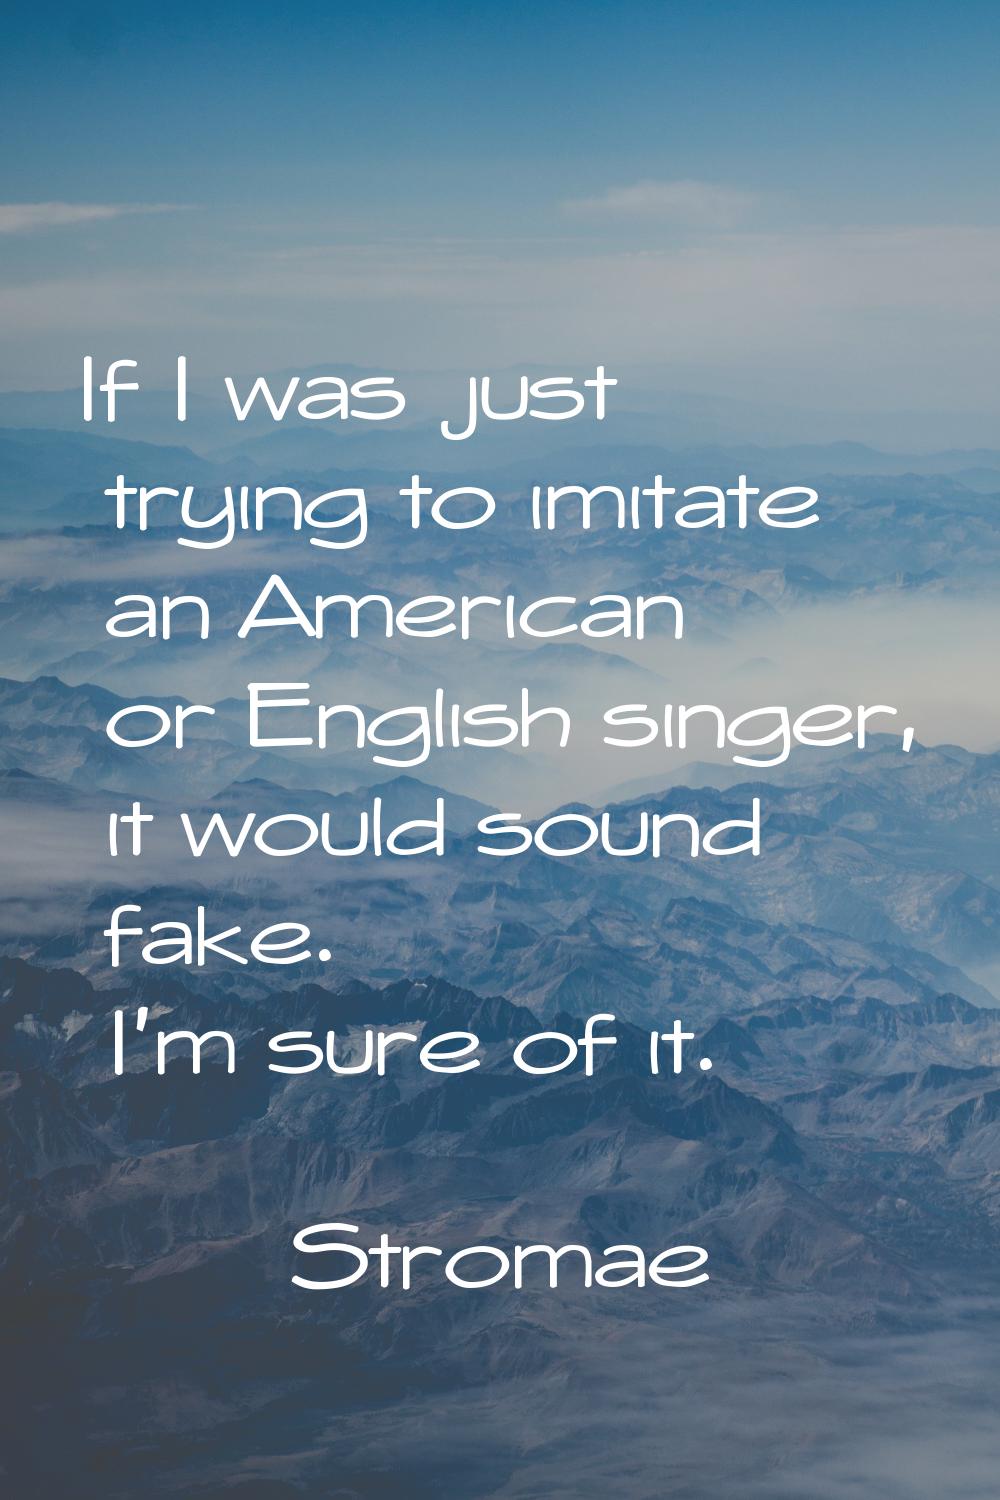 If I was just trying to imitate an American or English singer, it would sound fake. I'm sure of it.